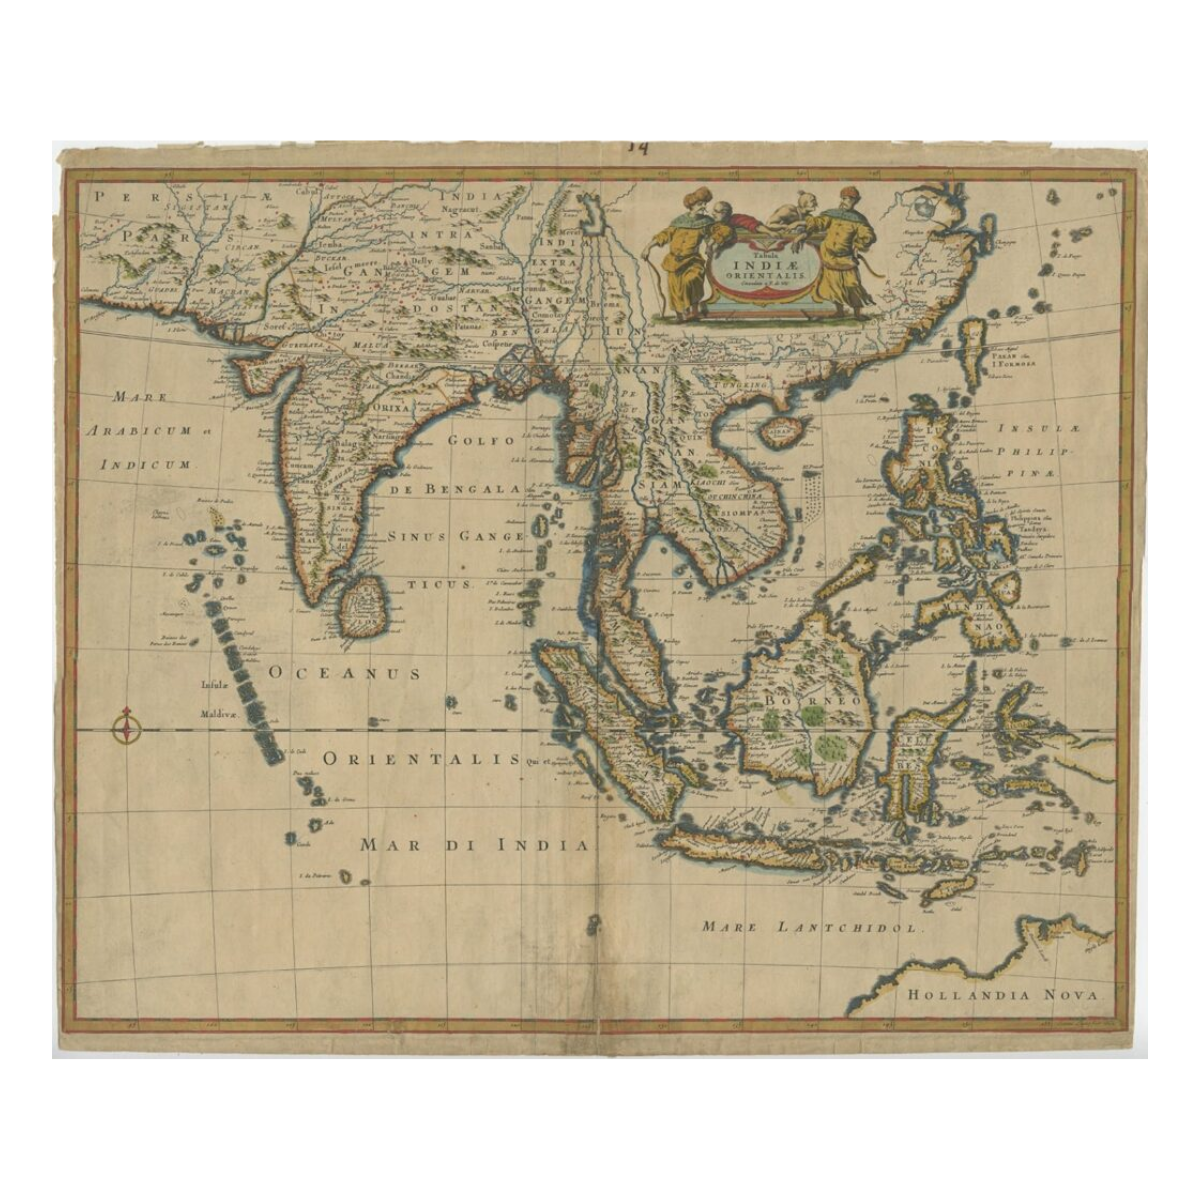 24. Capture Memories with an Antique Map: A Unique 2nd Anniversary Gift Idea